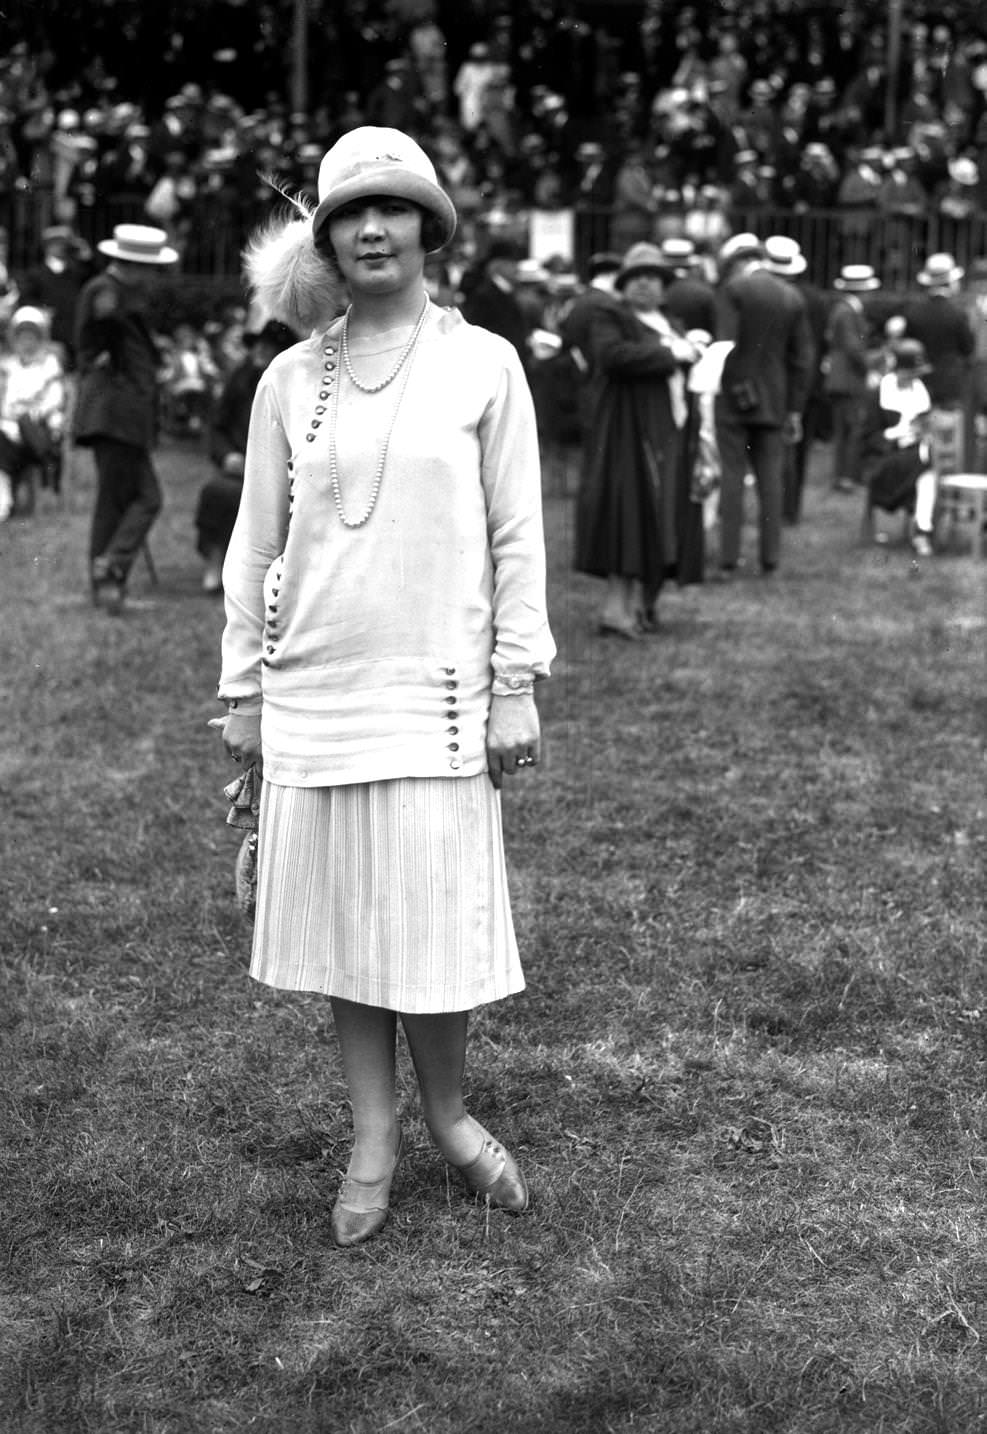 Fashion at the races, in Auteuil. Striped skirt ensemble, long top trimmed with buttons. Paris, 1925